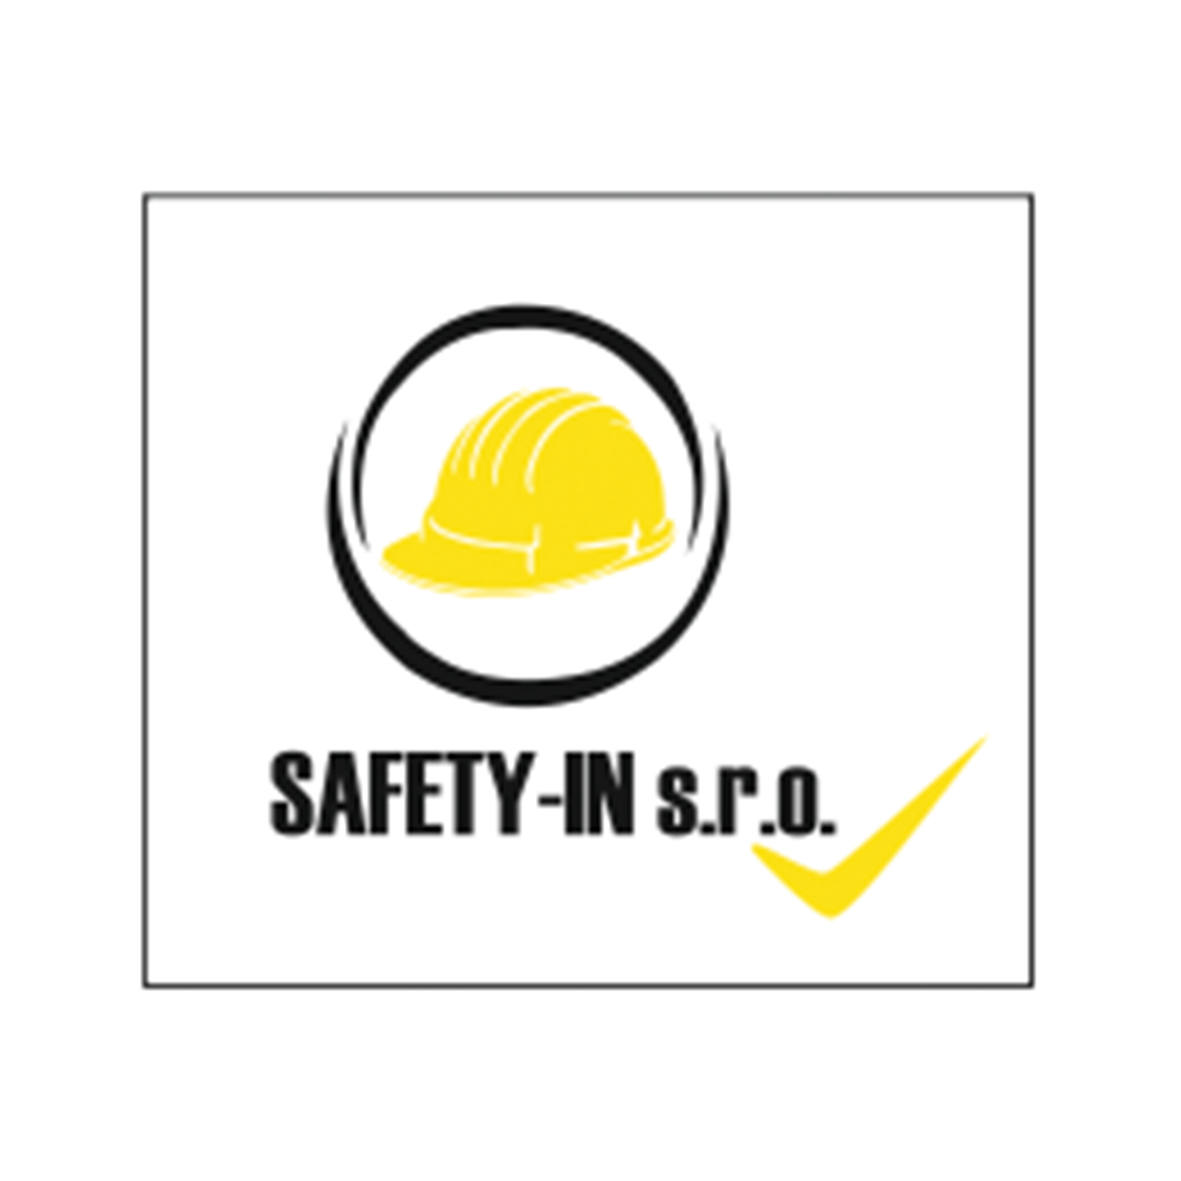 Safety in 